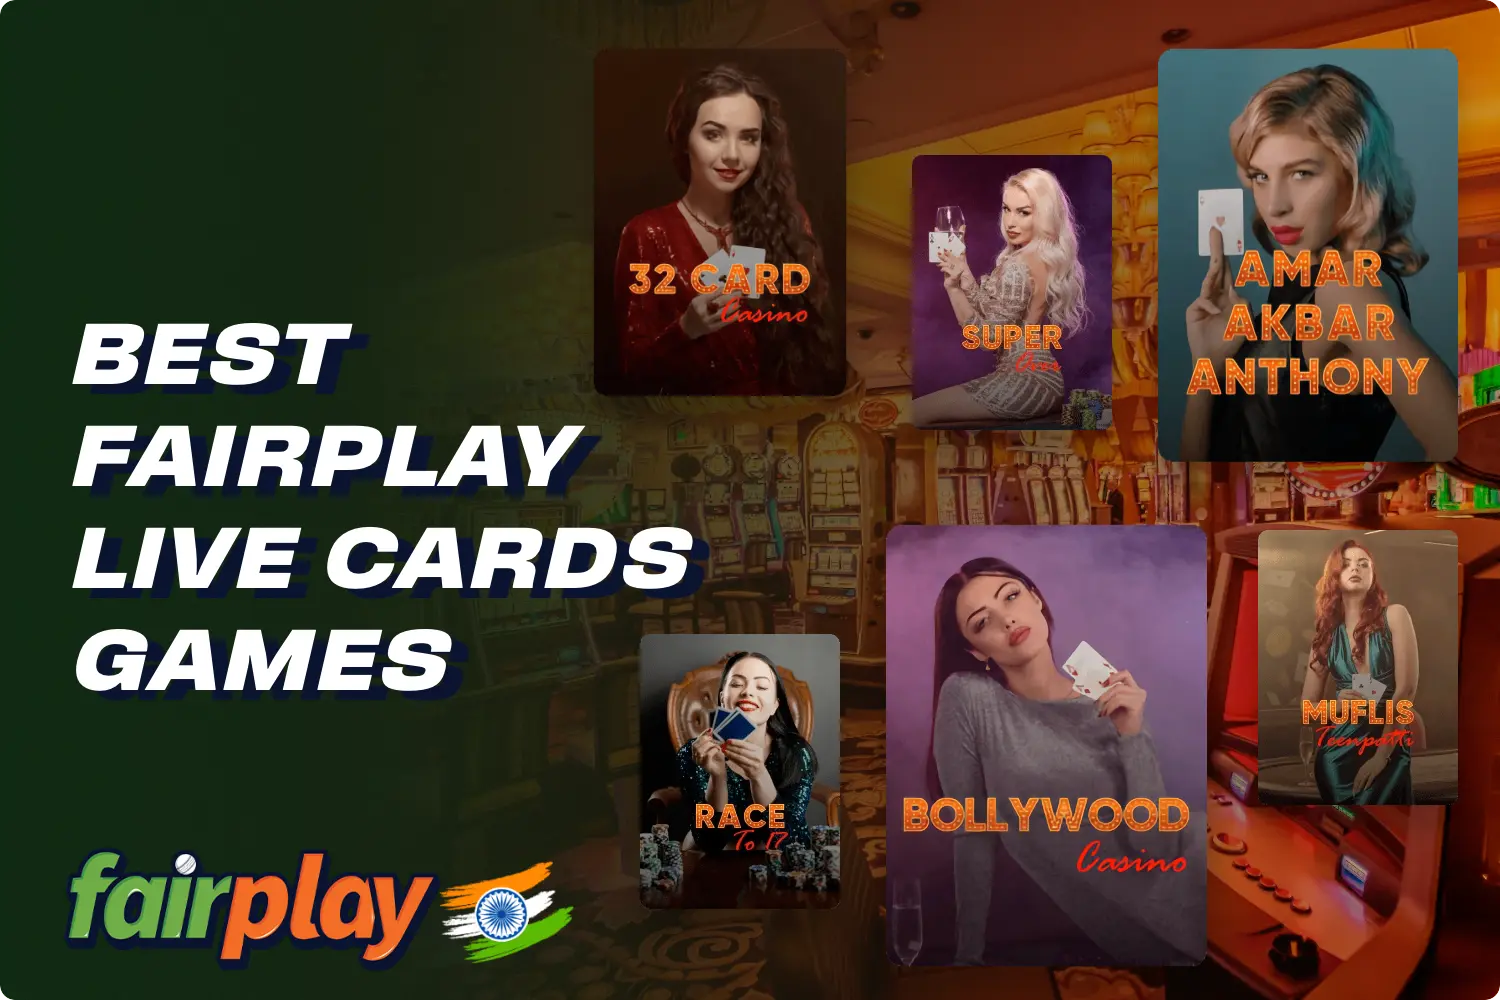 Fairplay Casino has many of the best card games on offer